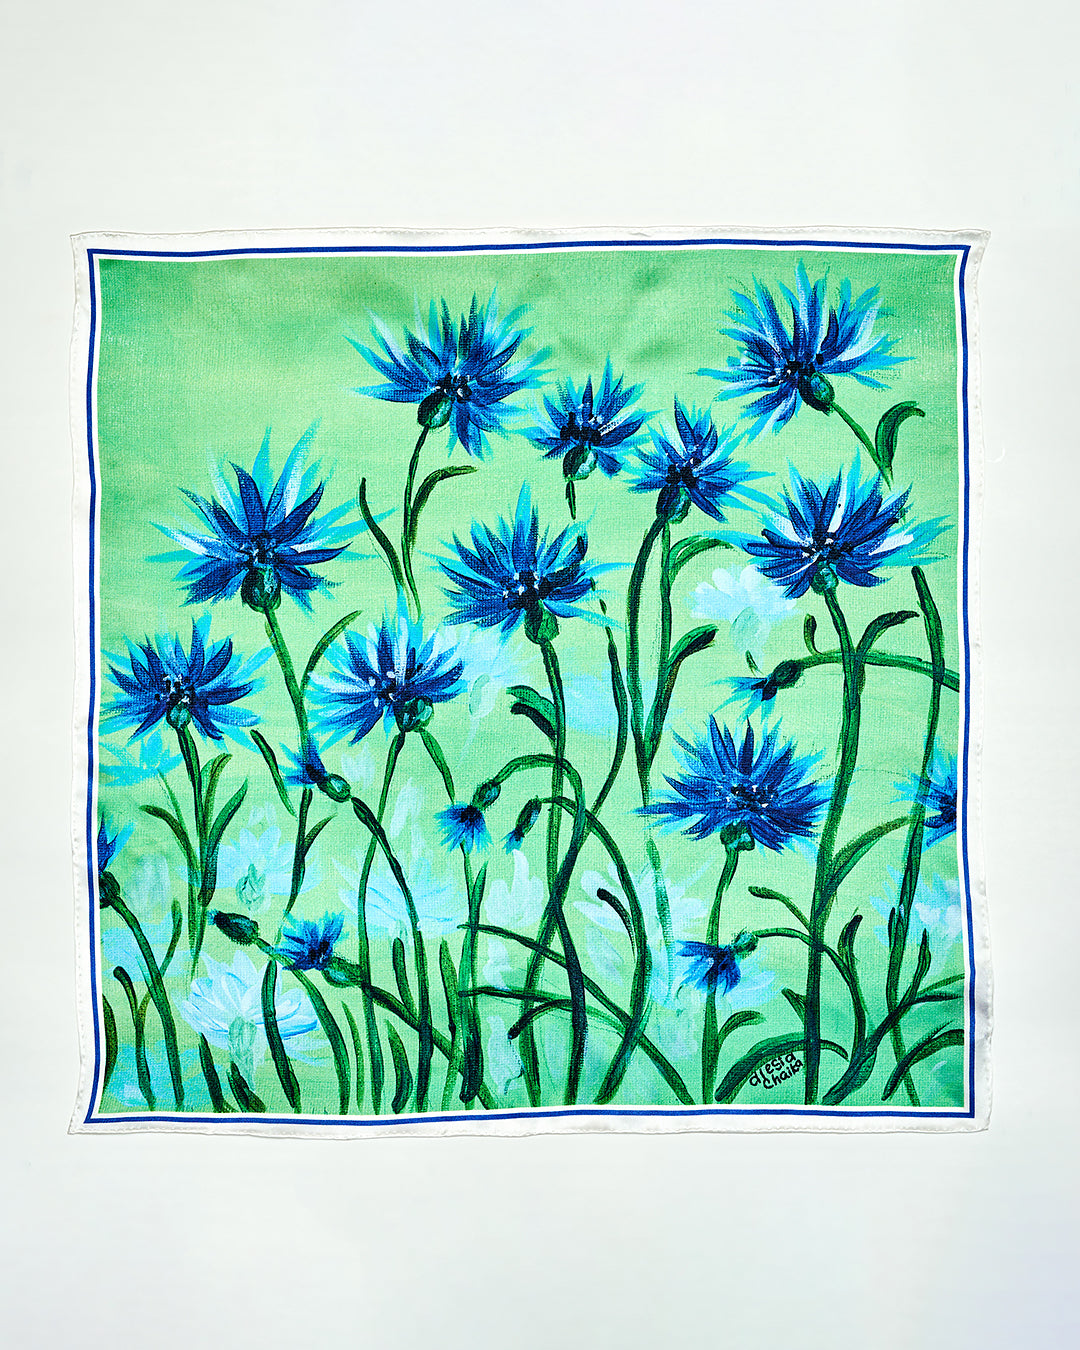 CORNFLOWERS DREAM Royal Blue and Green Wearable Art 100% Pure Silk Scarf by Alesia Chaika. Copy of an original signed fine artwork on canvas.